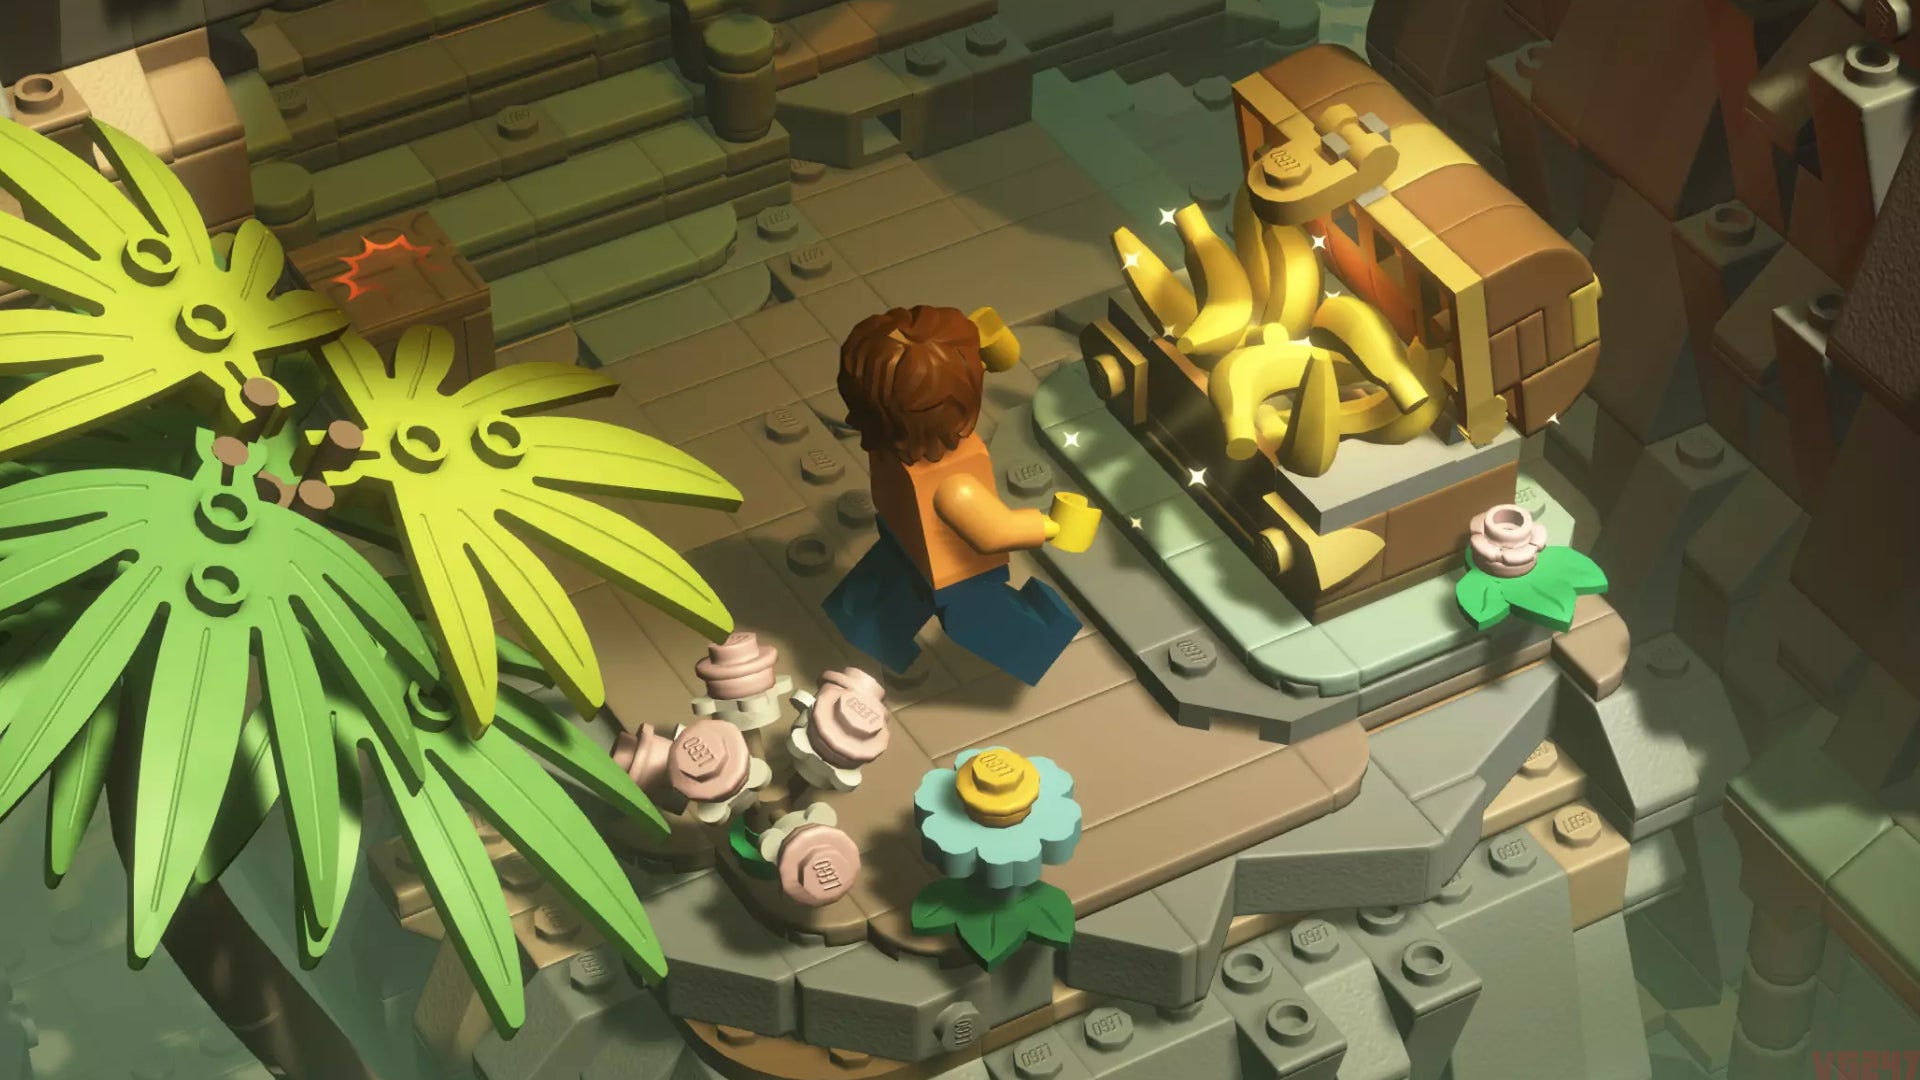 Image for Lego Bricktales review: A near-perfect video game representation of joyous Lego creativity